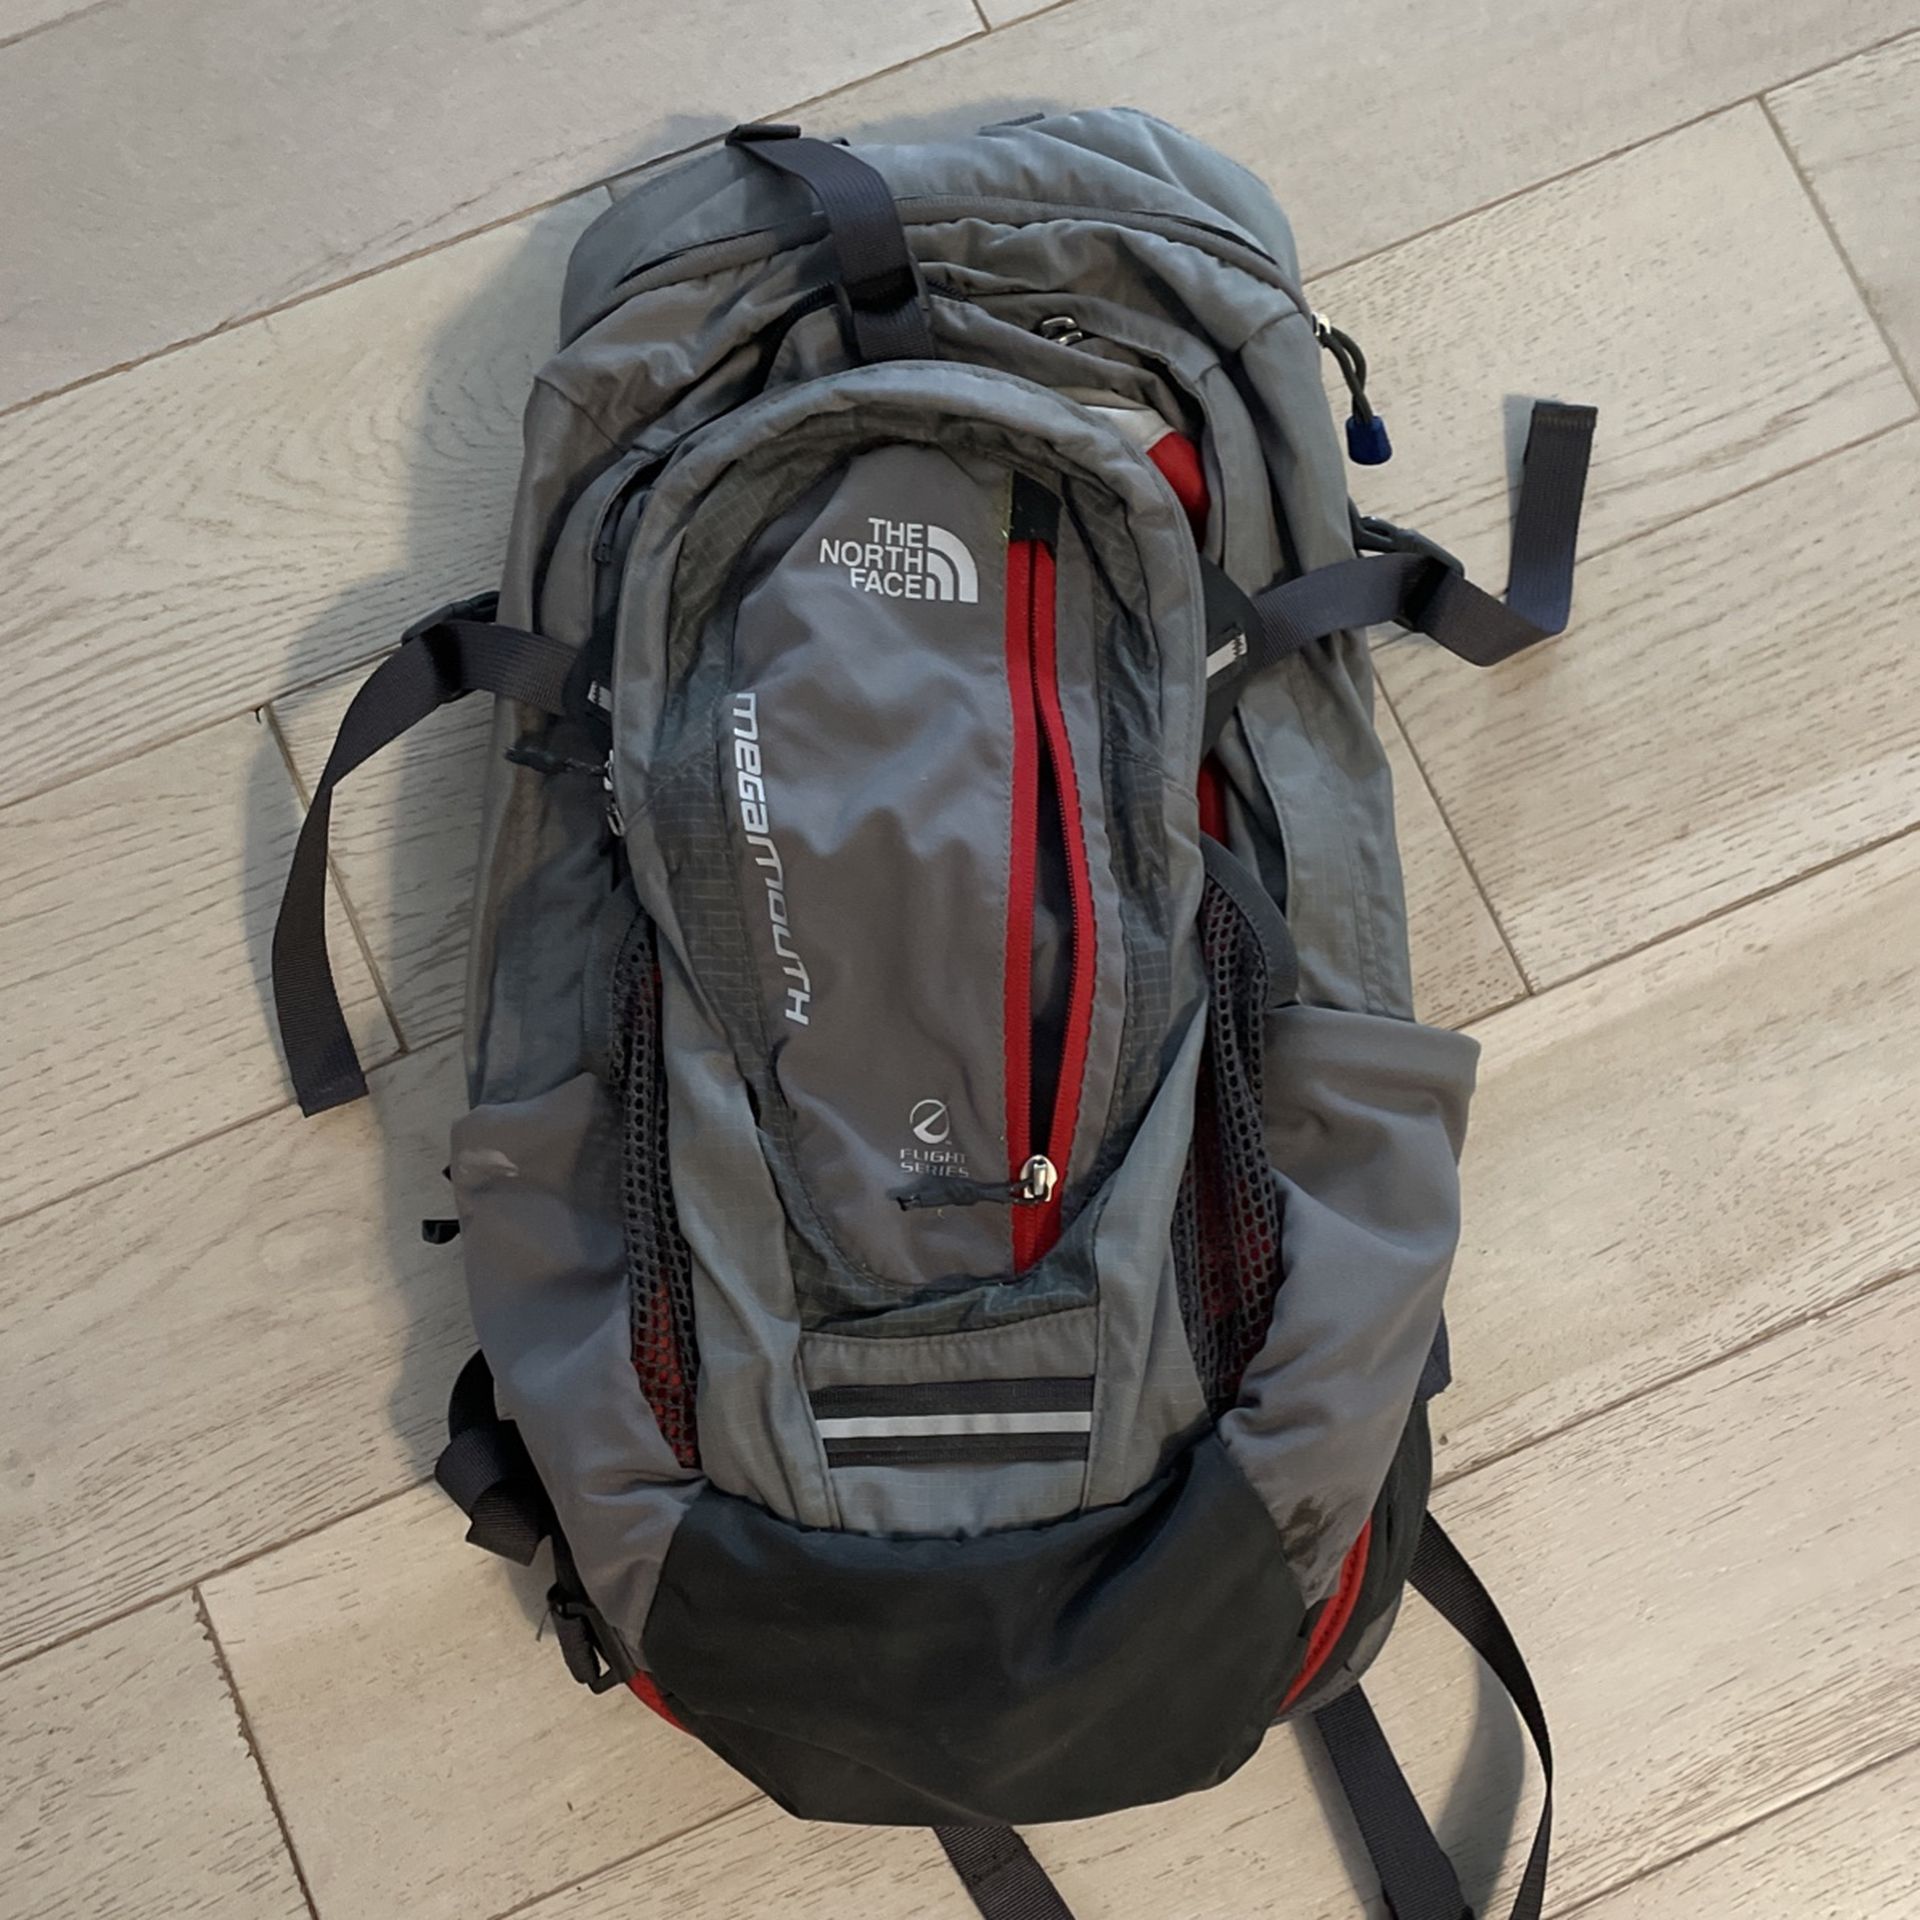 North Face Megamouth flight Series Hydration Backpack